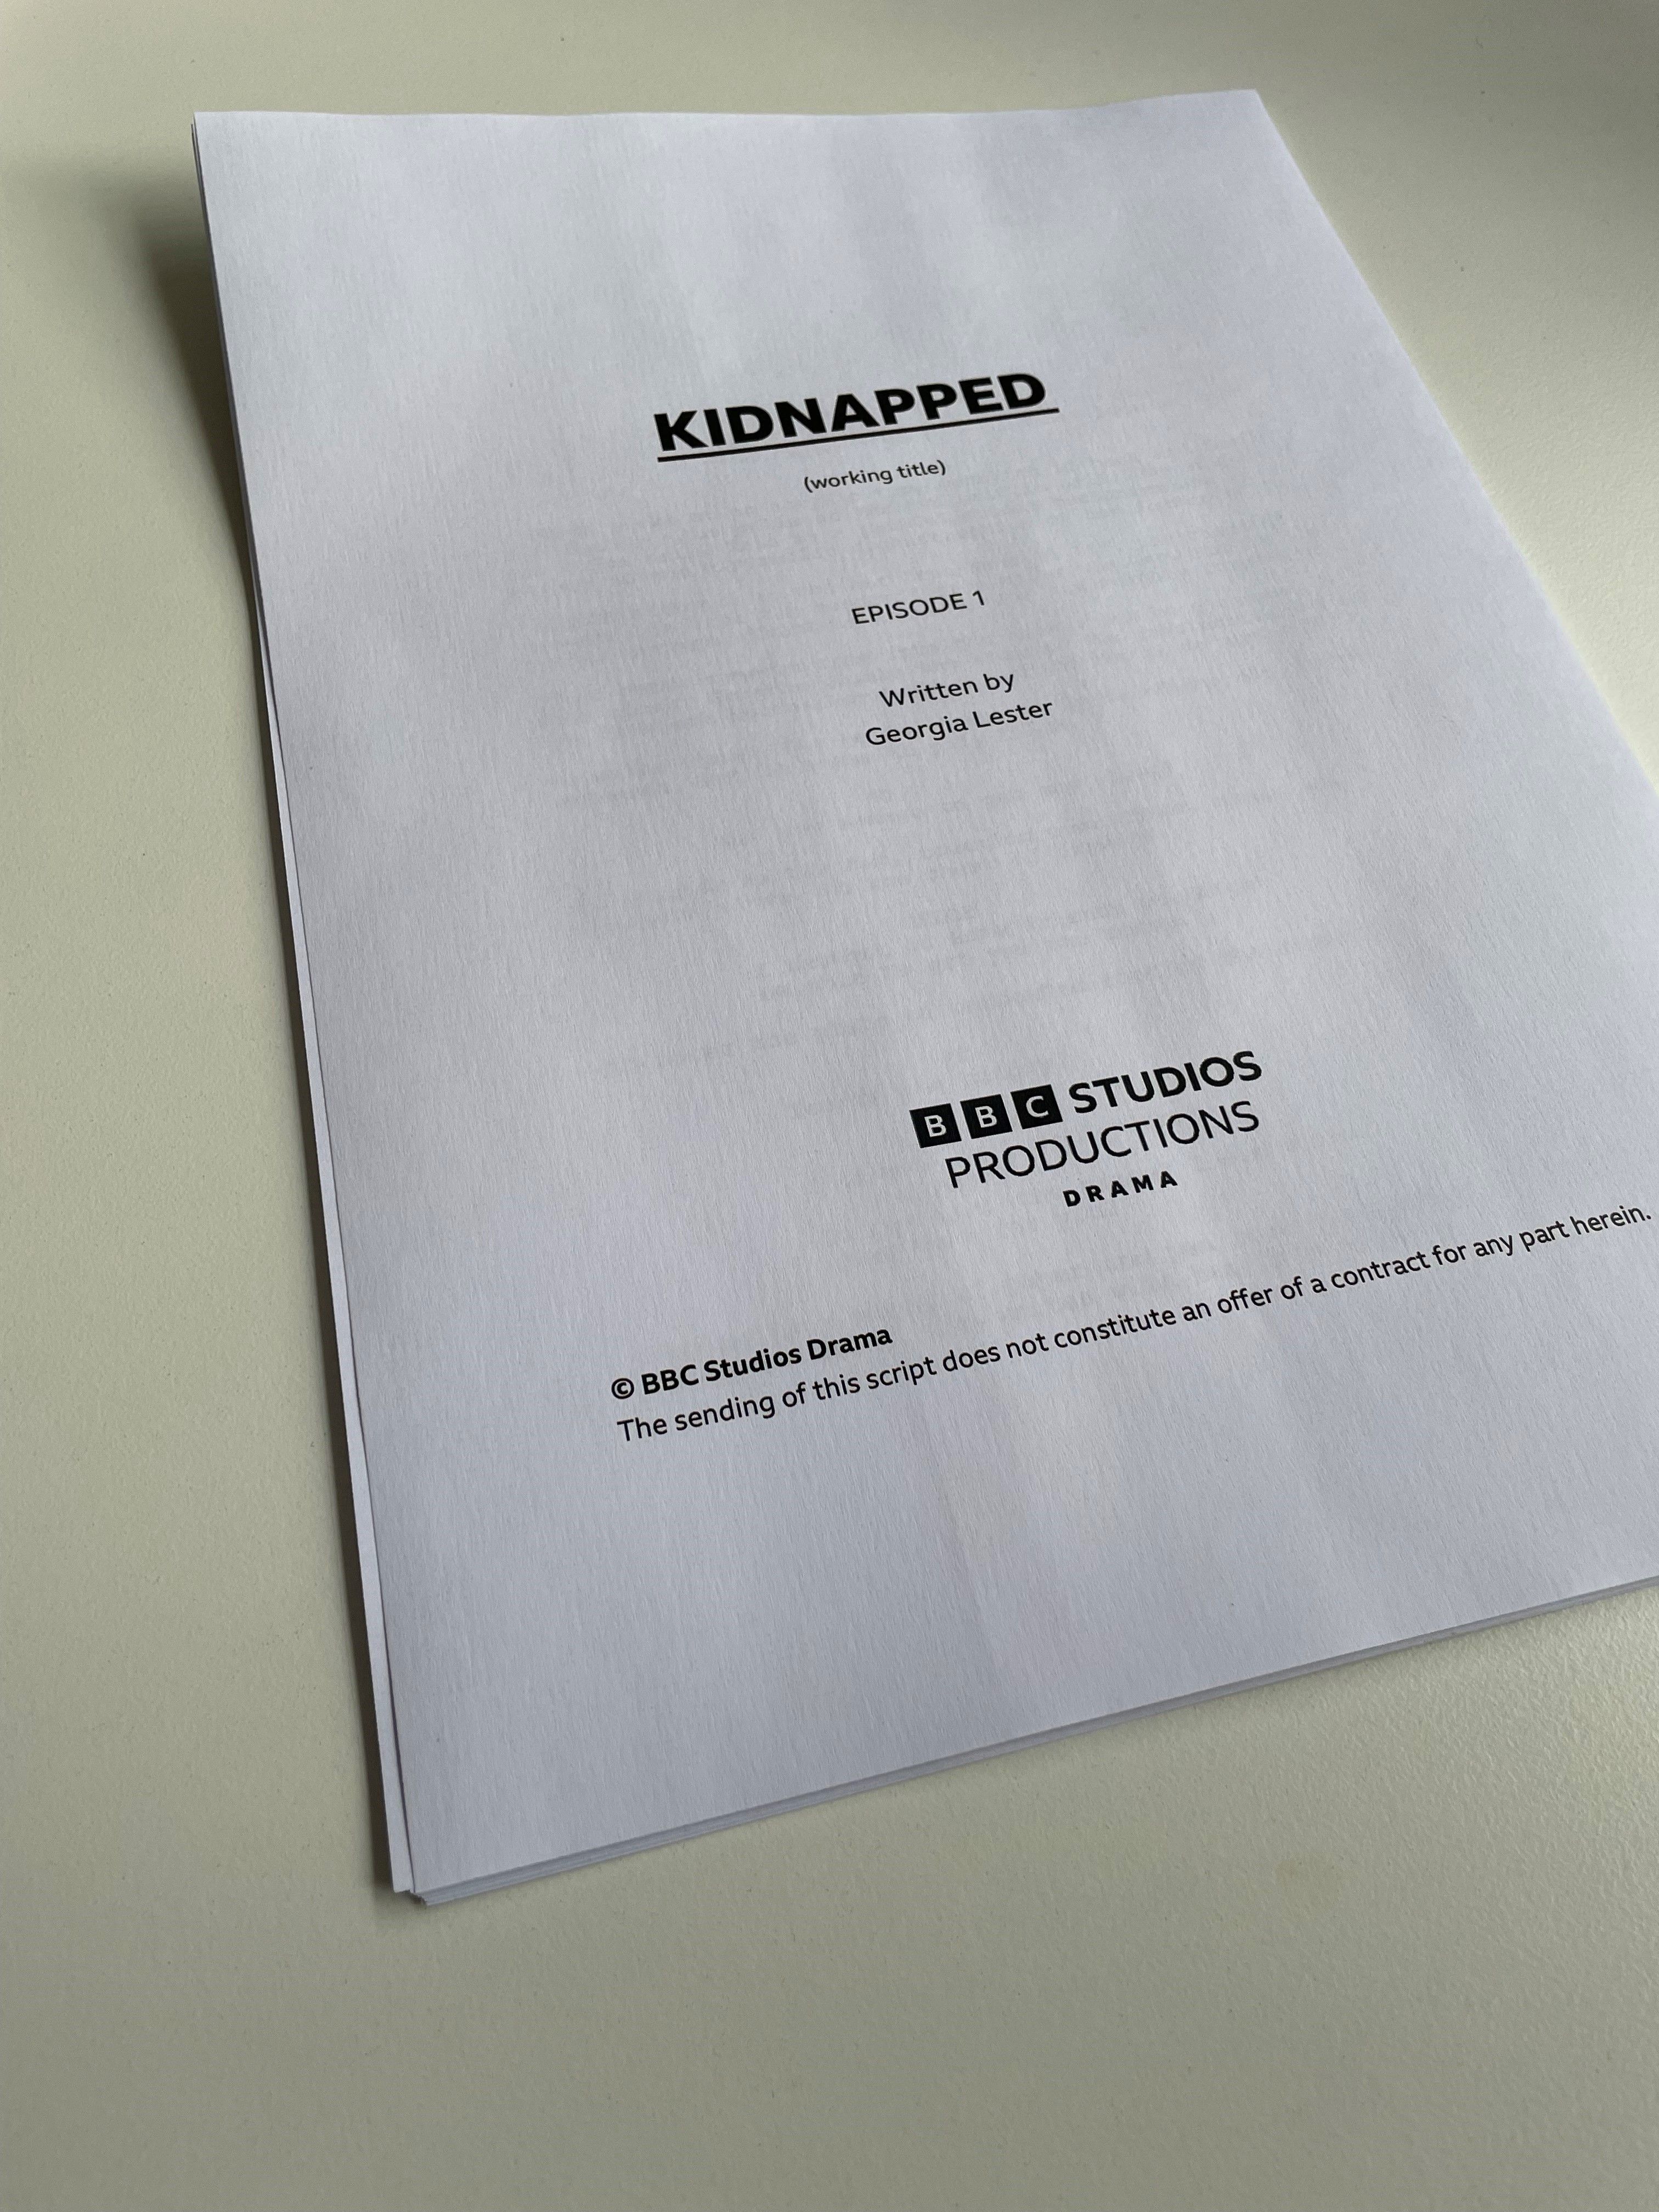 The BBC has commissioned Kidnapped, a new factual drama based on the true story of Chloe Ayling, a British model who was abducted in Italy in 2017, having travelled there for a photo shoot. 